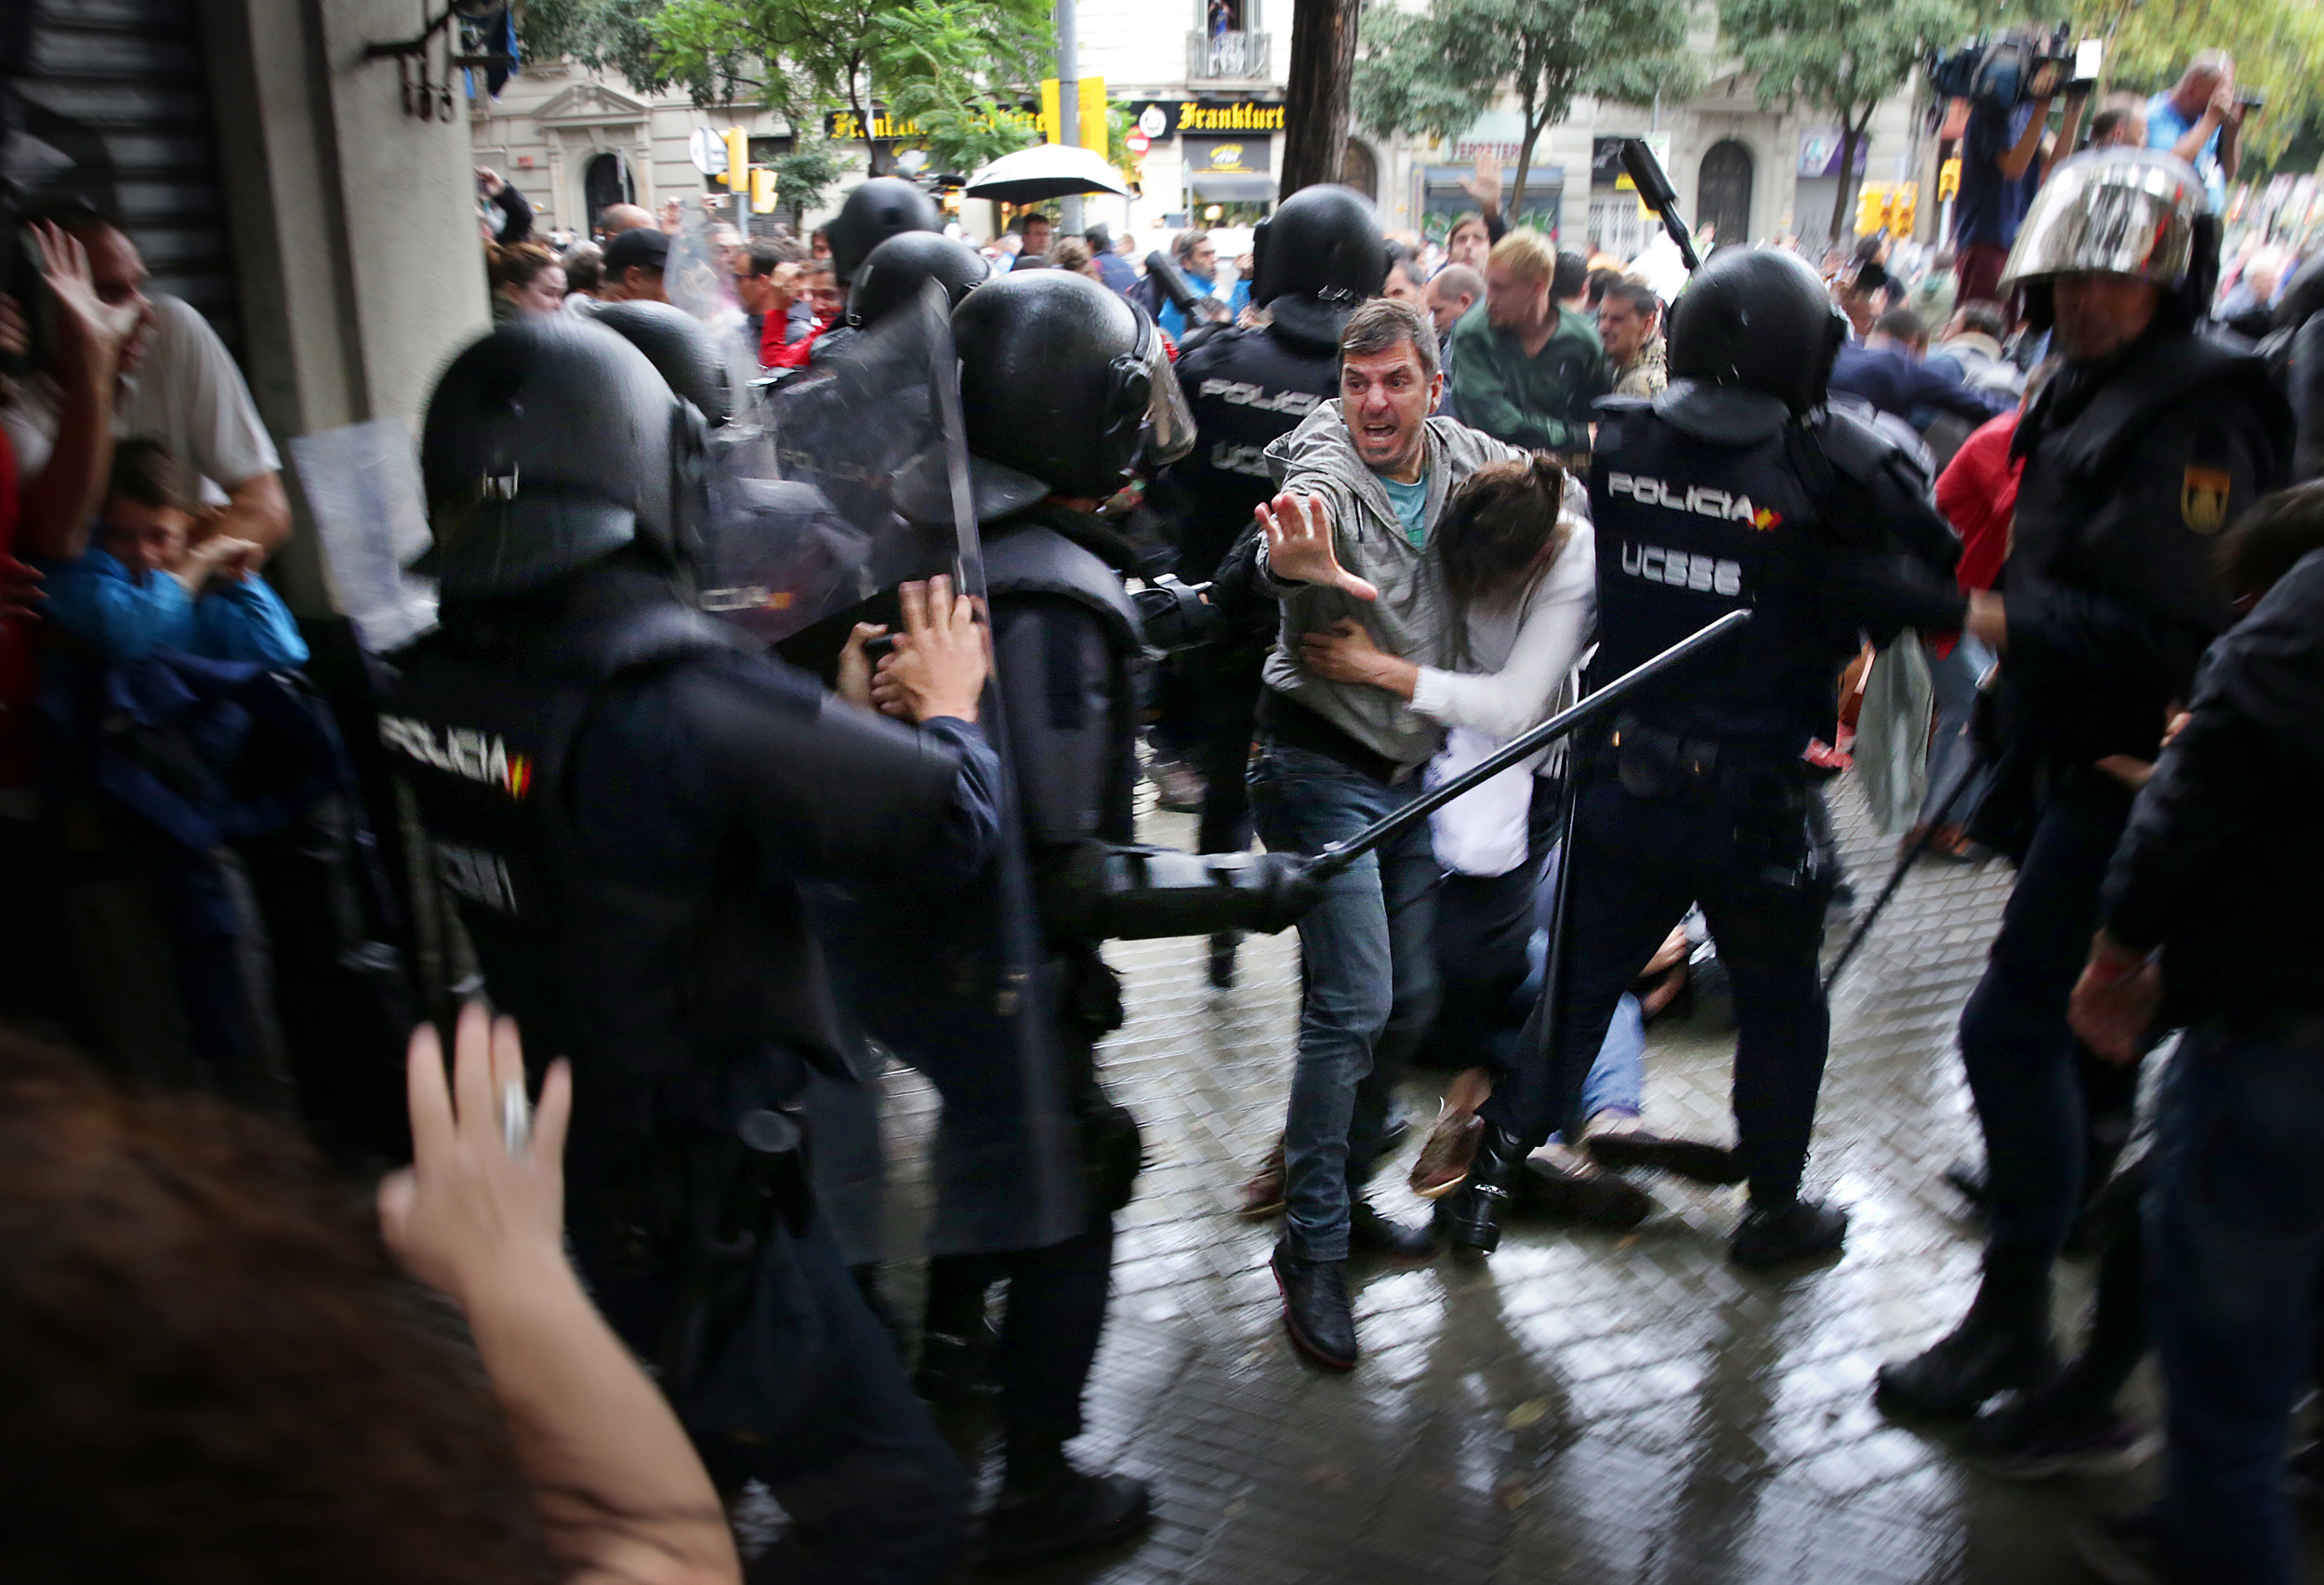 A man holds out his arm to protect a woman from  the Spanish riot police (by Jordi Play)